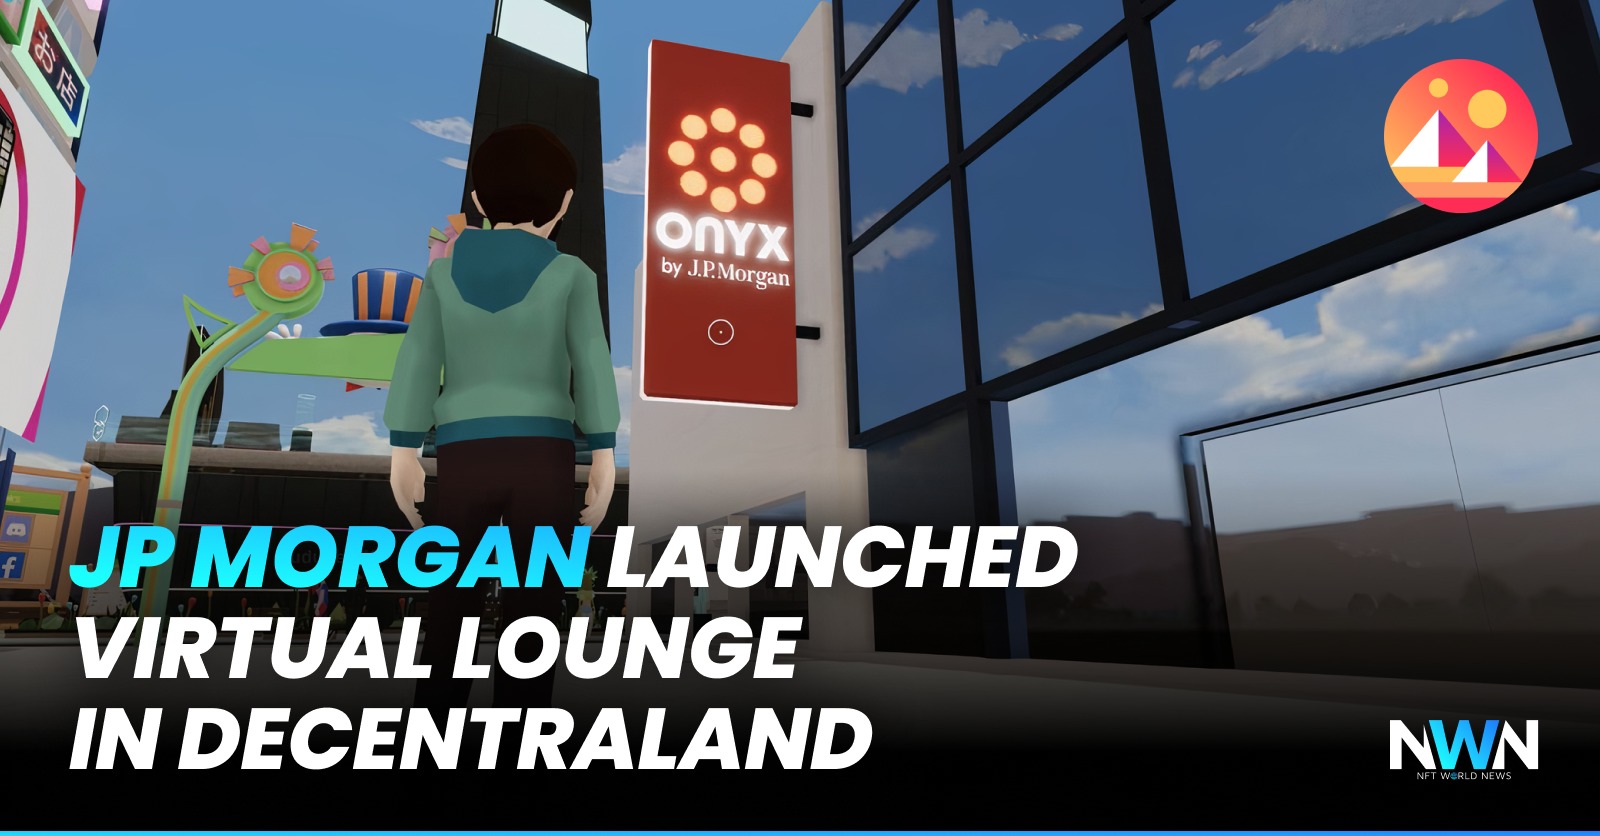 JP Morgan Launched Virtual Lounge In Decentraland